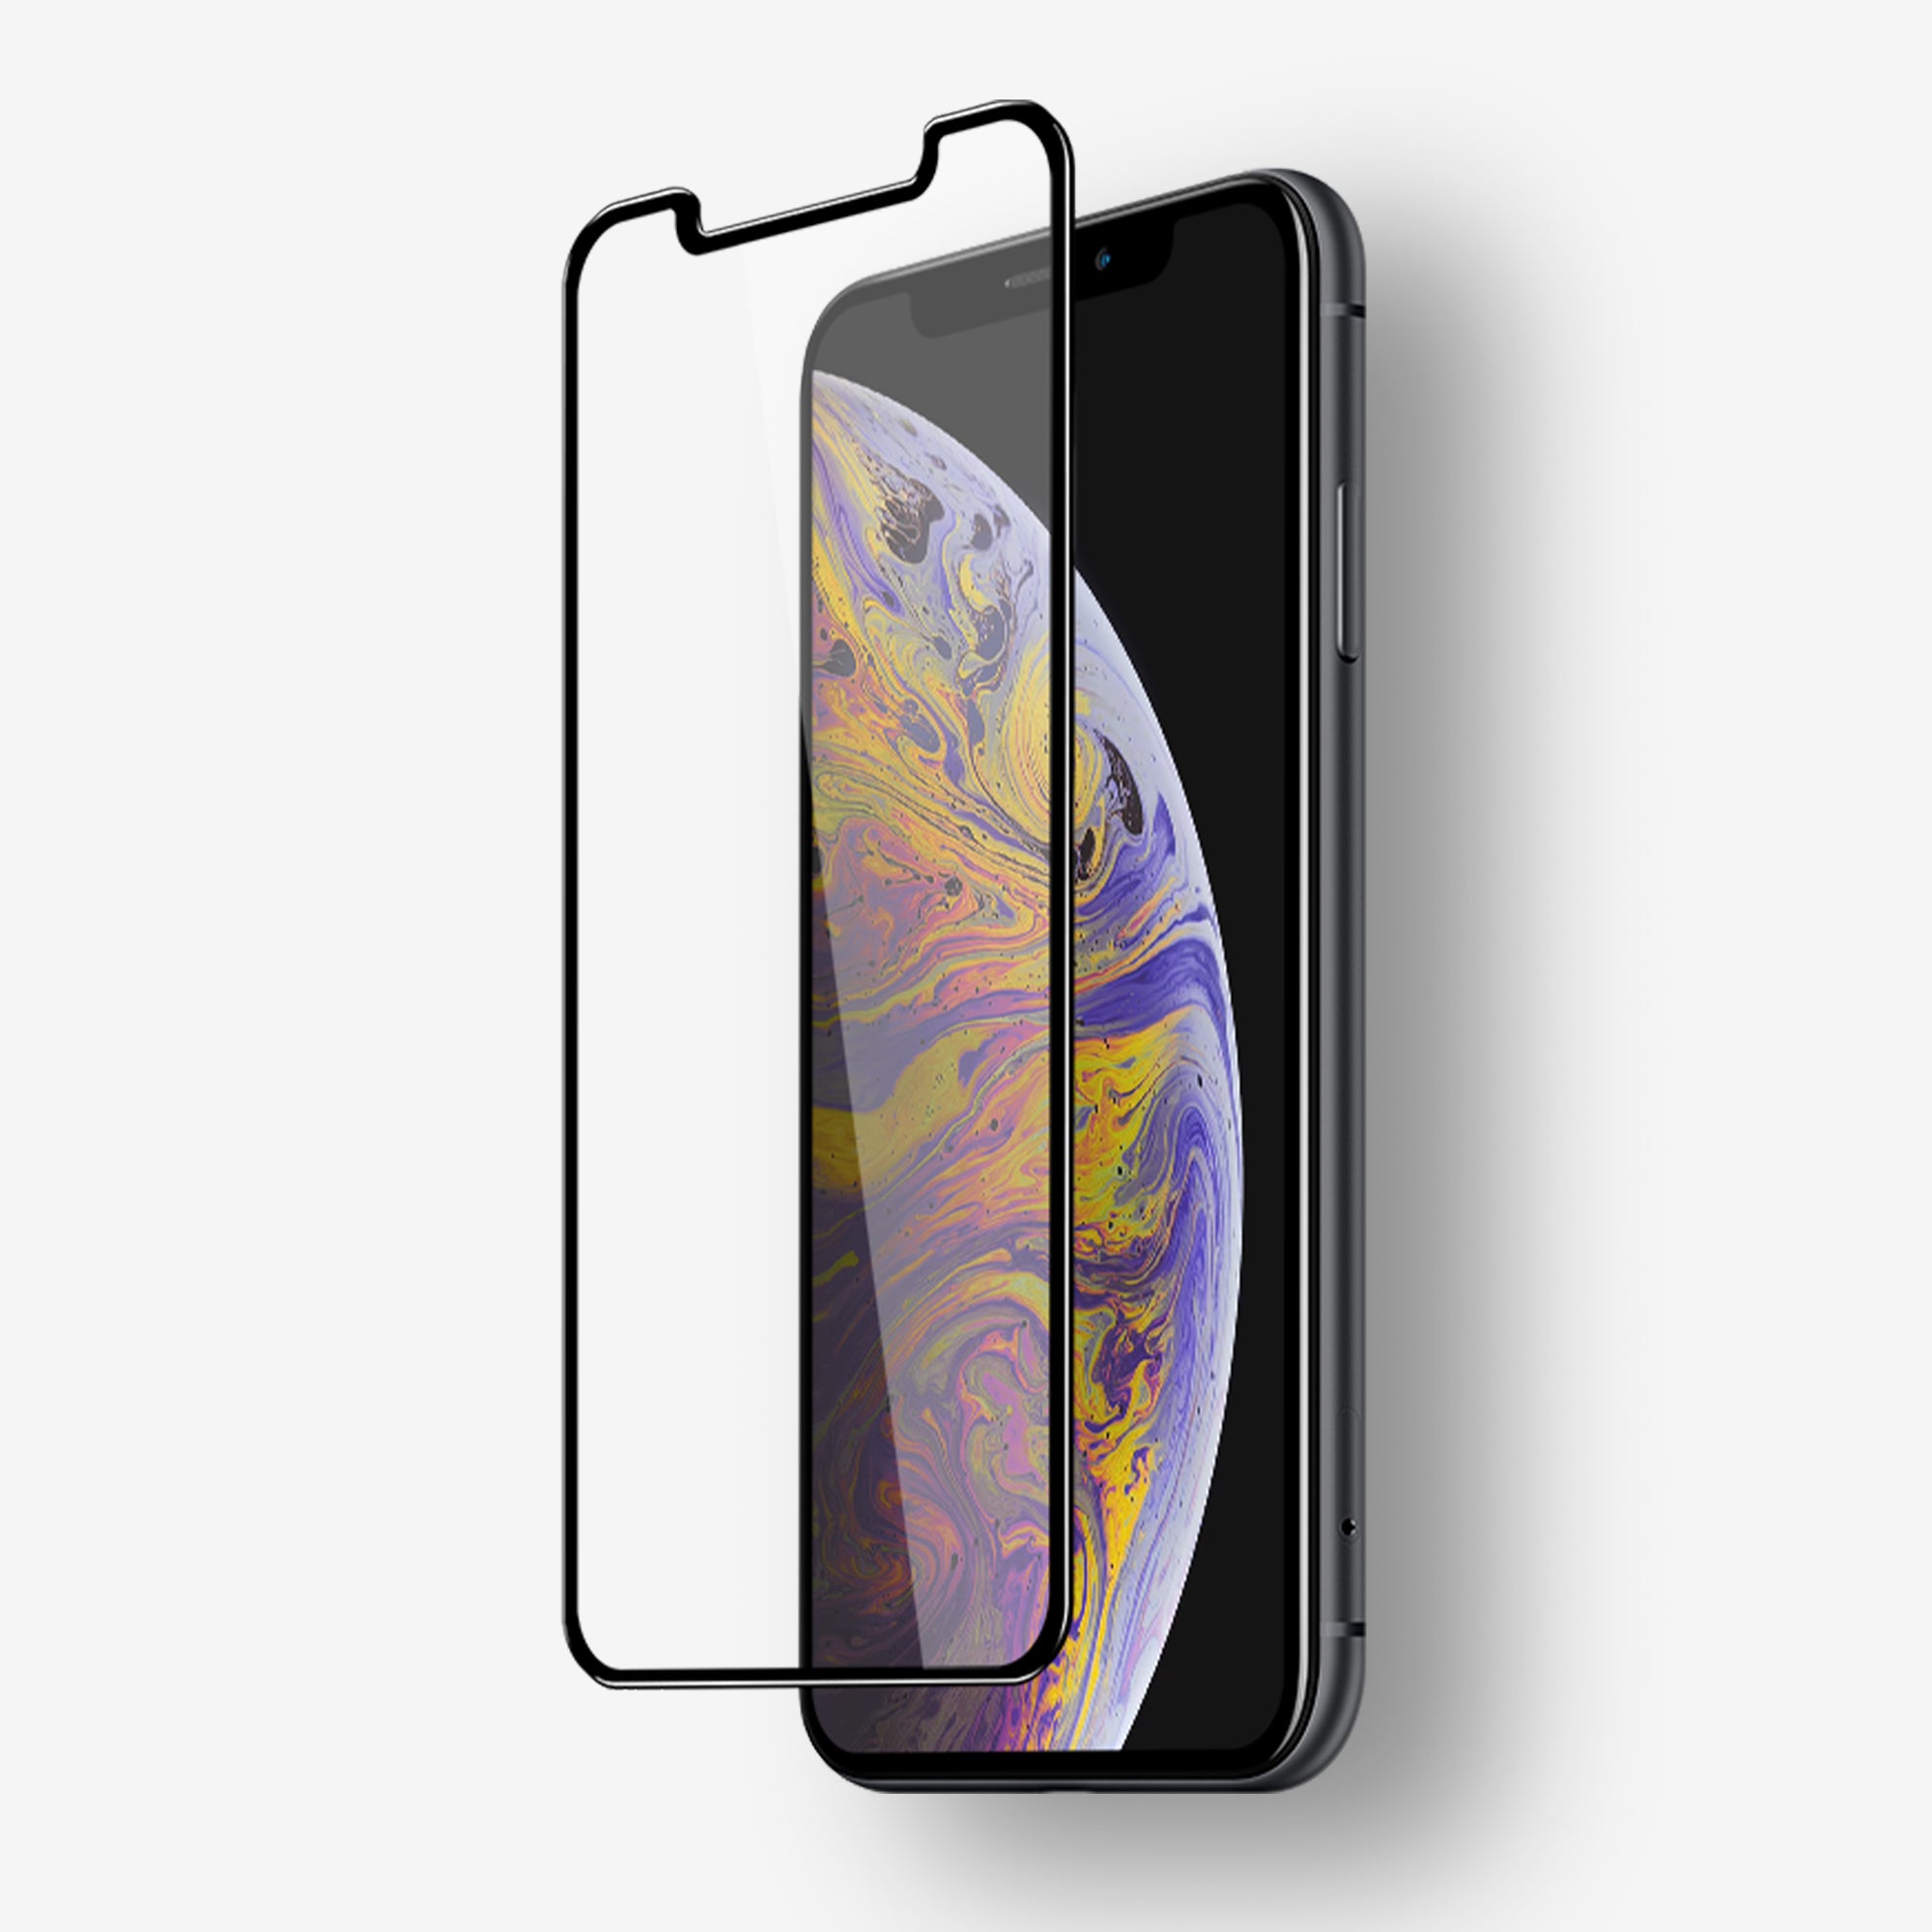 Buy Amazing Thing iPhone XS Max Fully Covered Glass Screen Protector -  Tempered Supreme Glass Online - Shop Smartphones, Tablets & Wearables on  Carrefour UAE